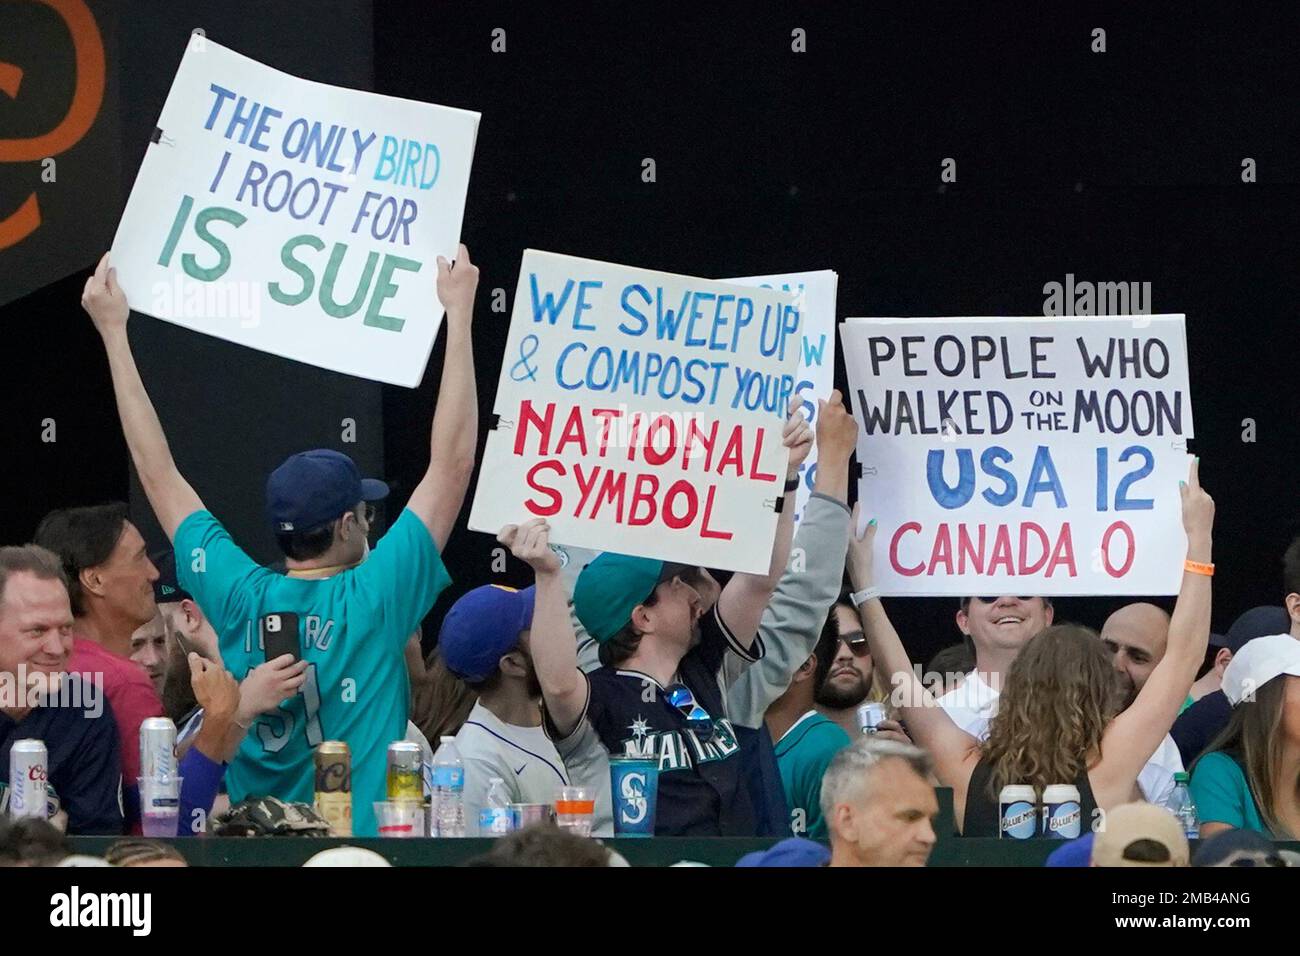 Seattle Mariners fans hold up signs mocking Canada during a